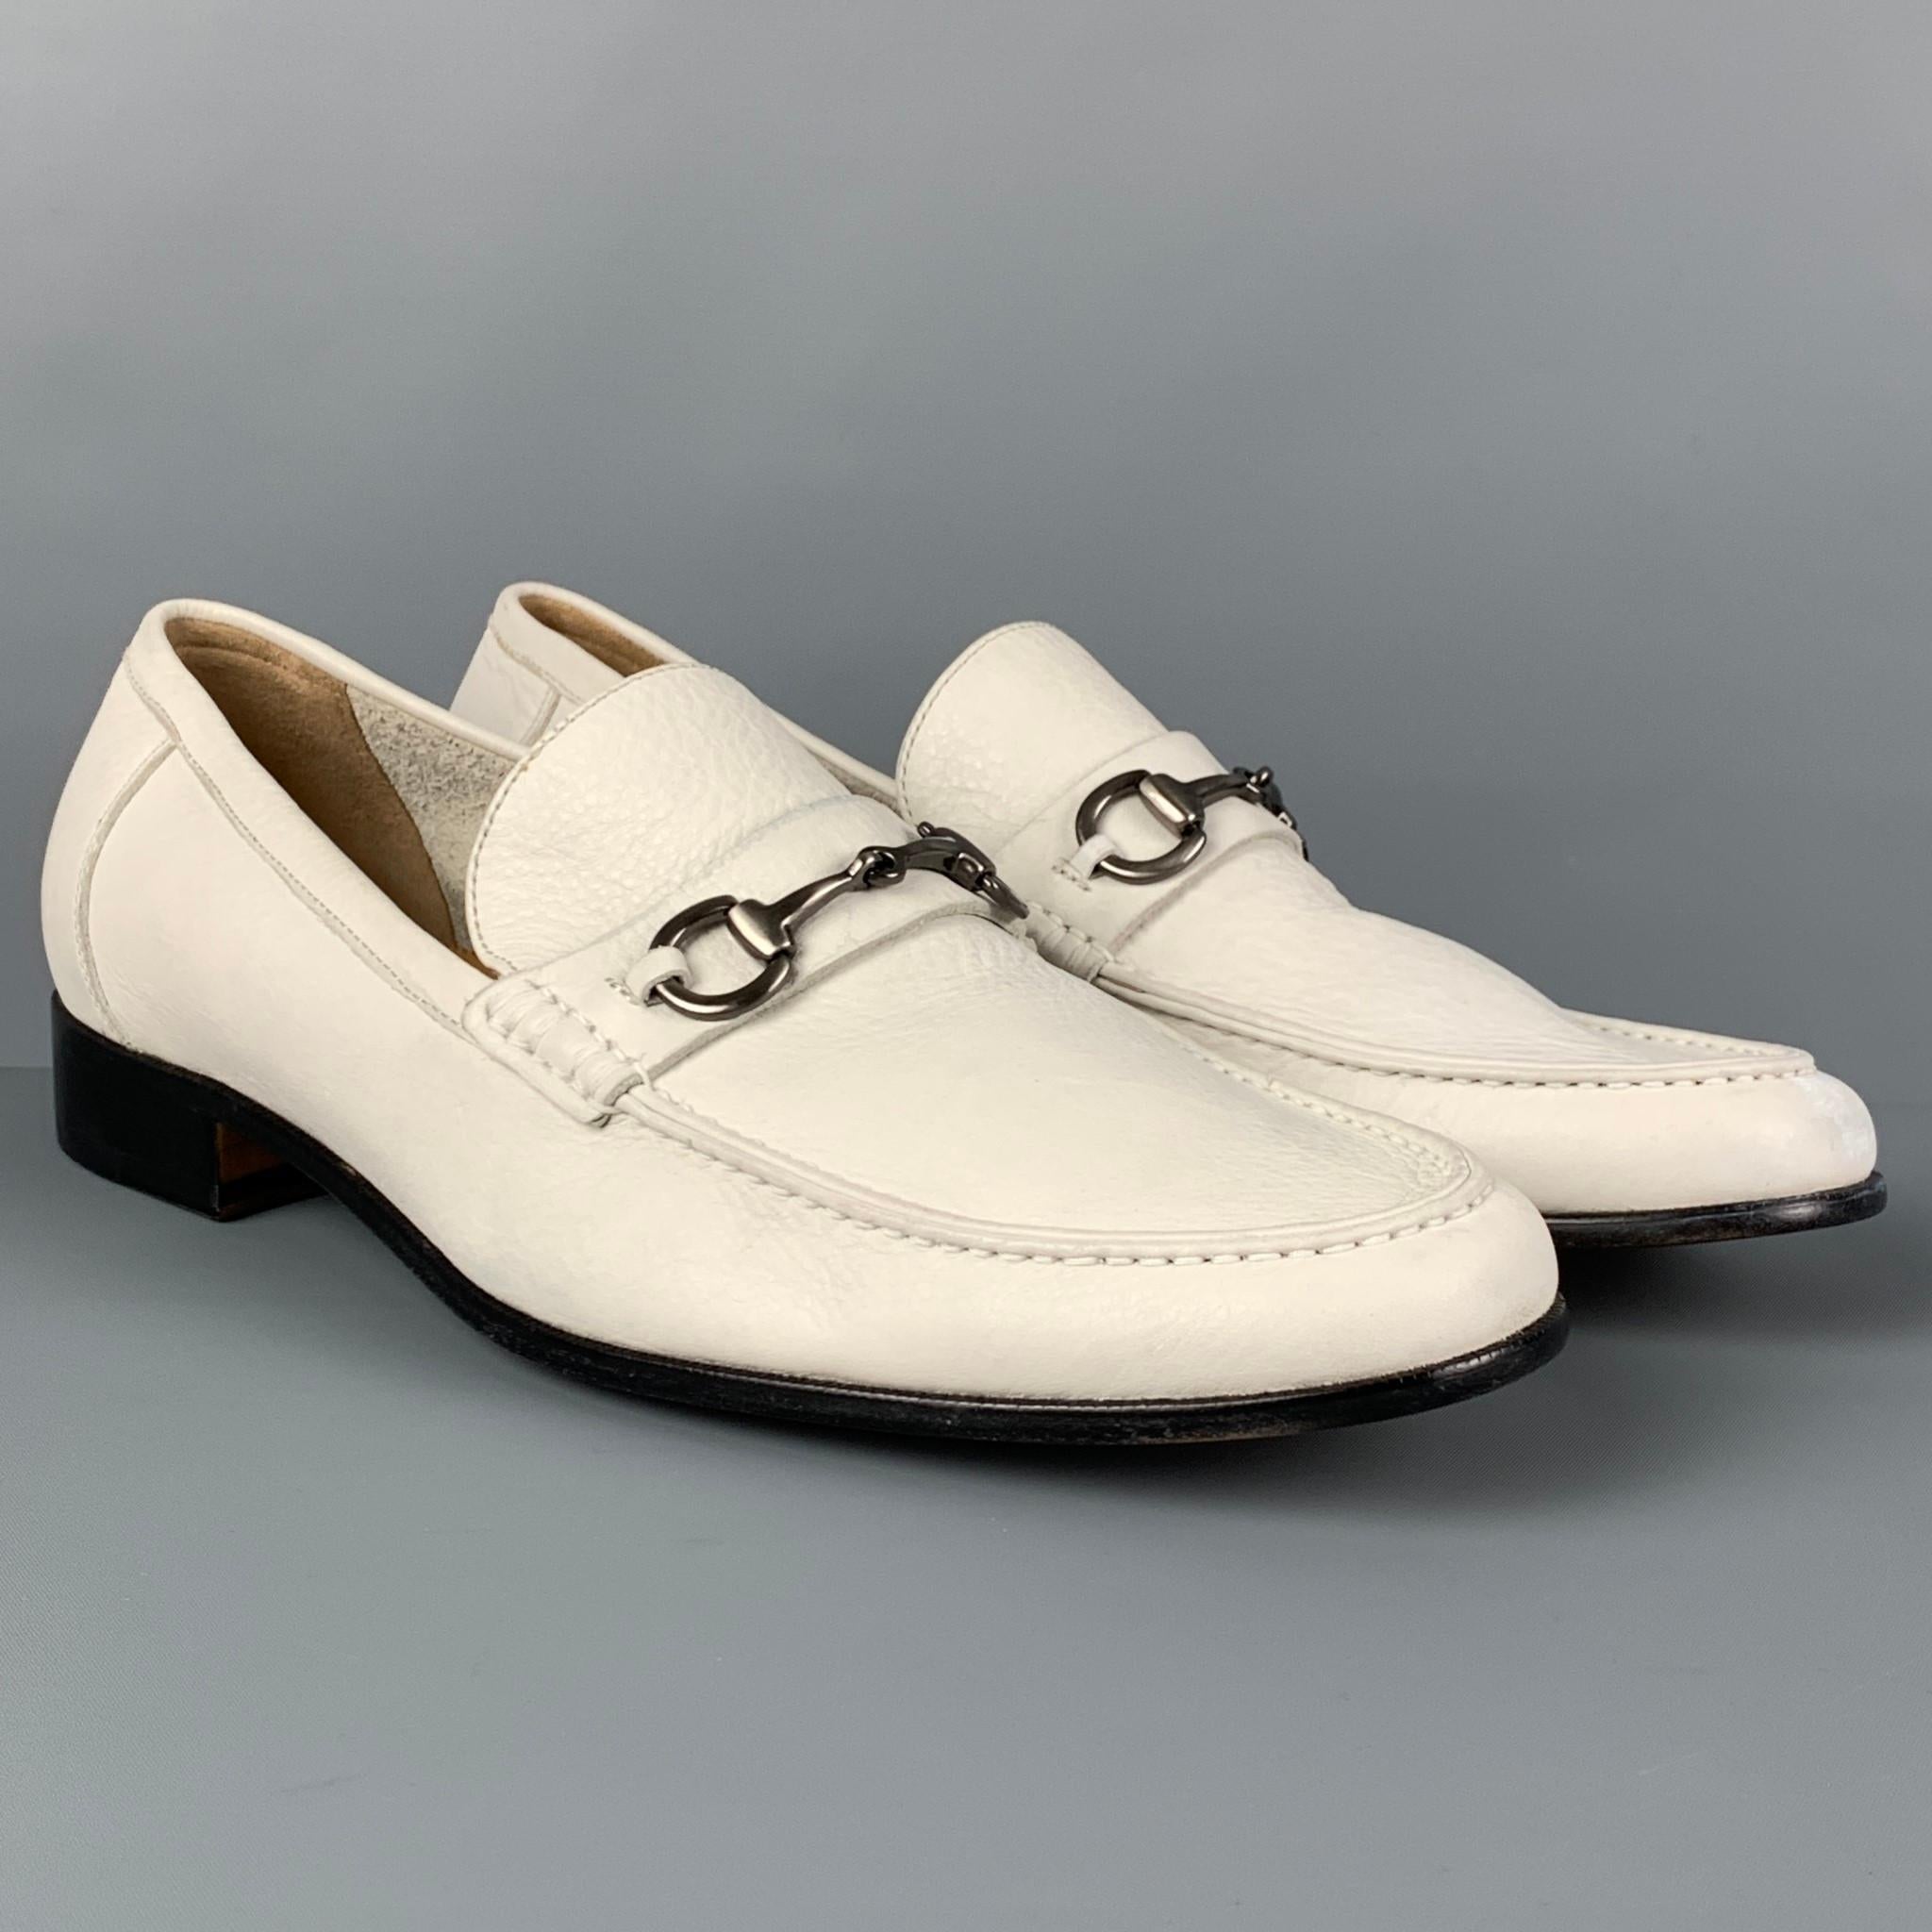 SAKS FIFTH AVENUE loafers comes in a white leather featuring a horse bit detail and a slip on style. 

Very Good Pre-Owned Condition.
Marked: 11

Outsole: 12.5 in. x 4 in. 